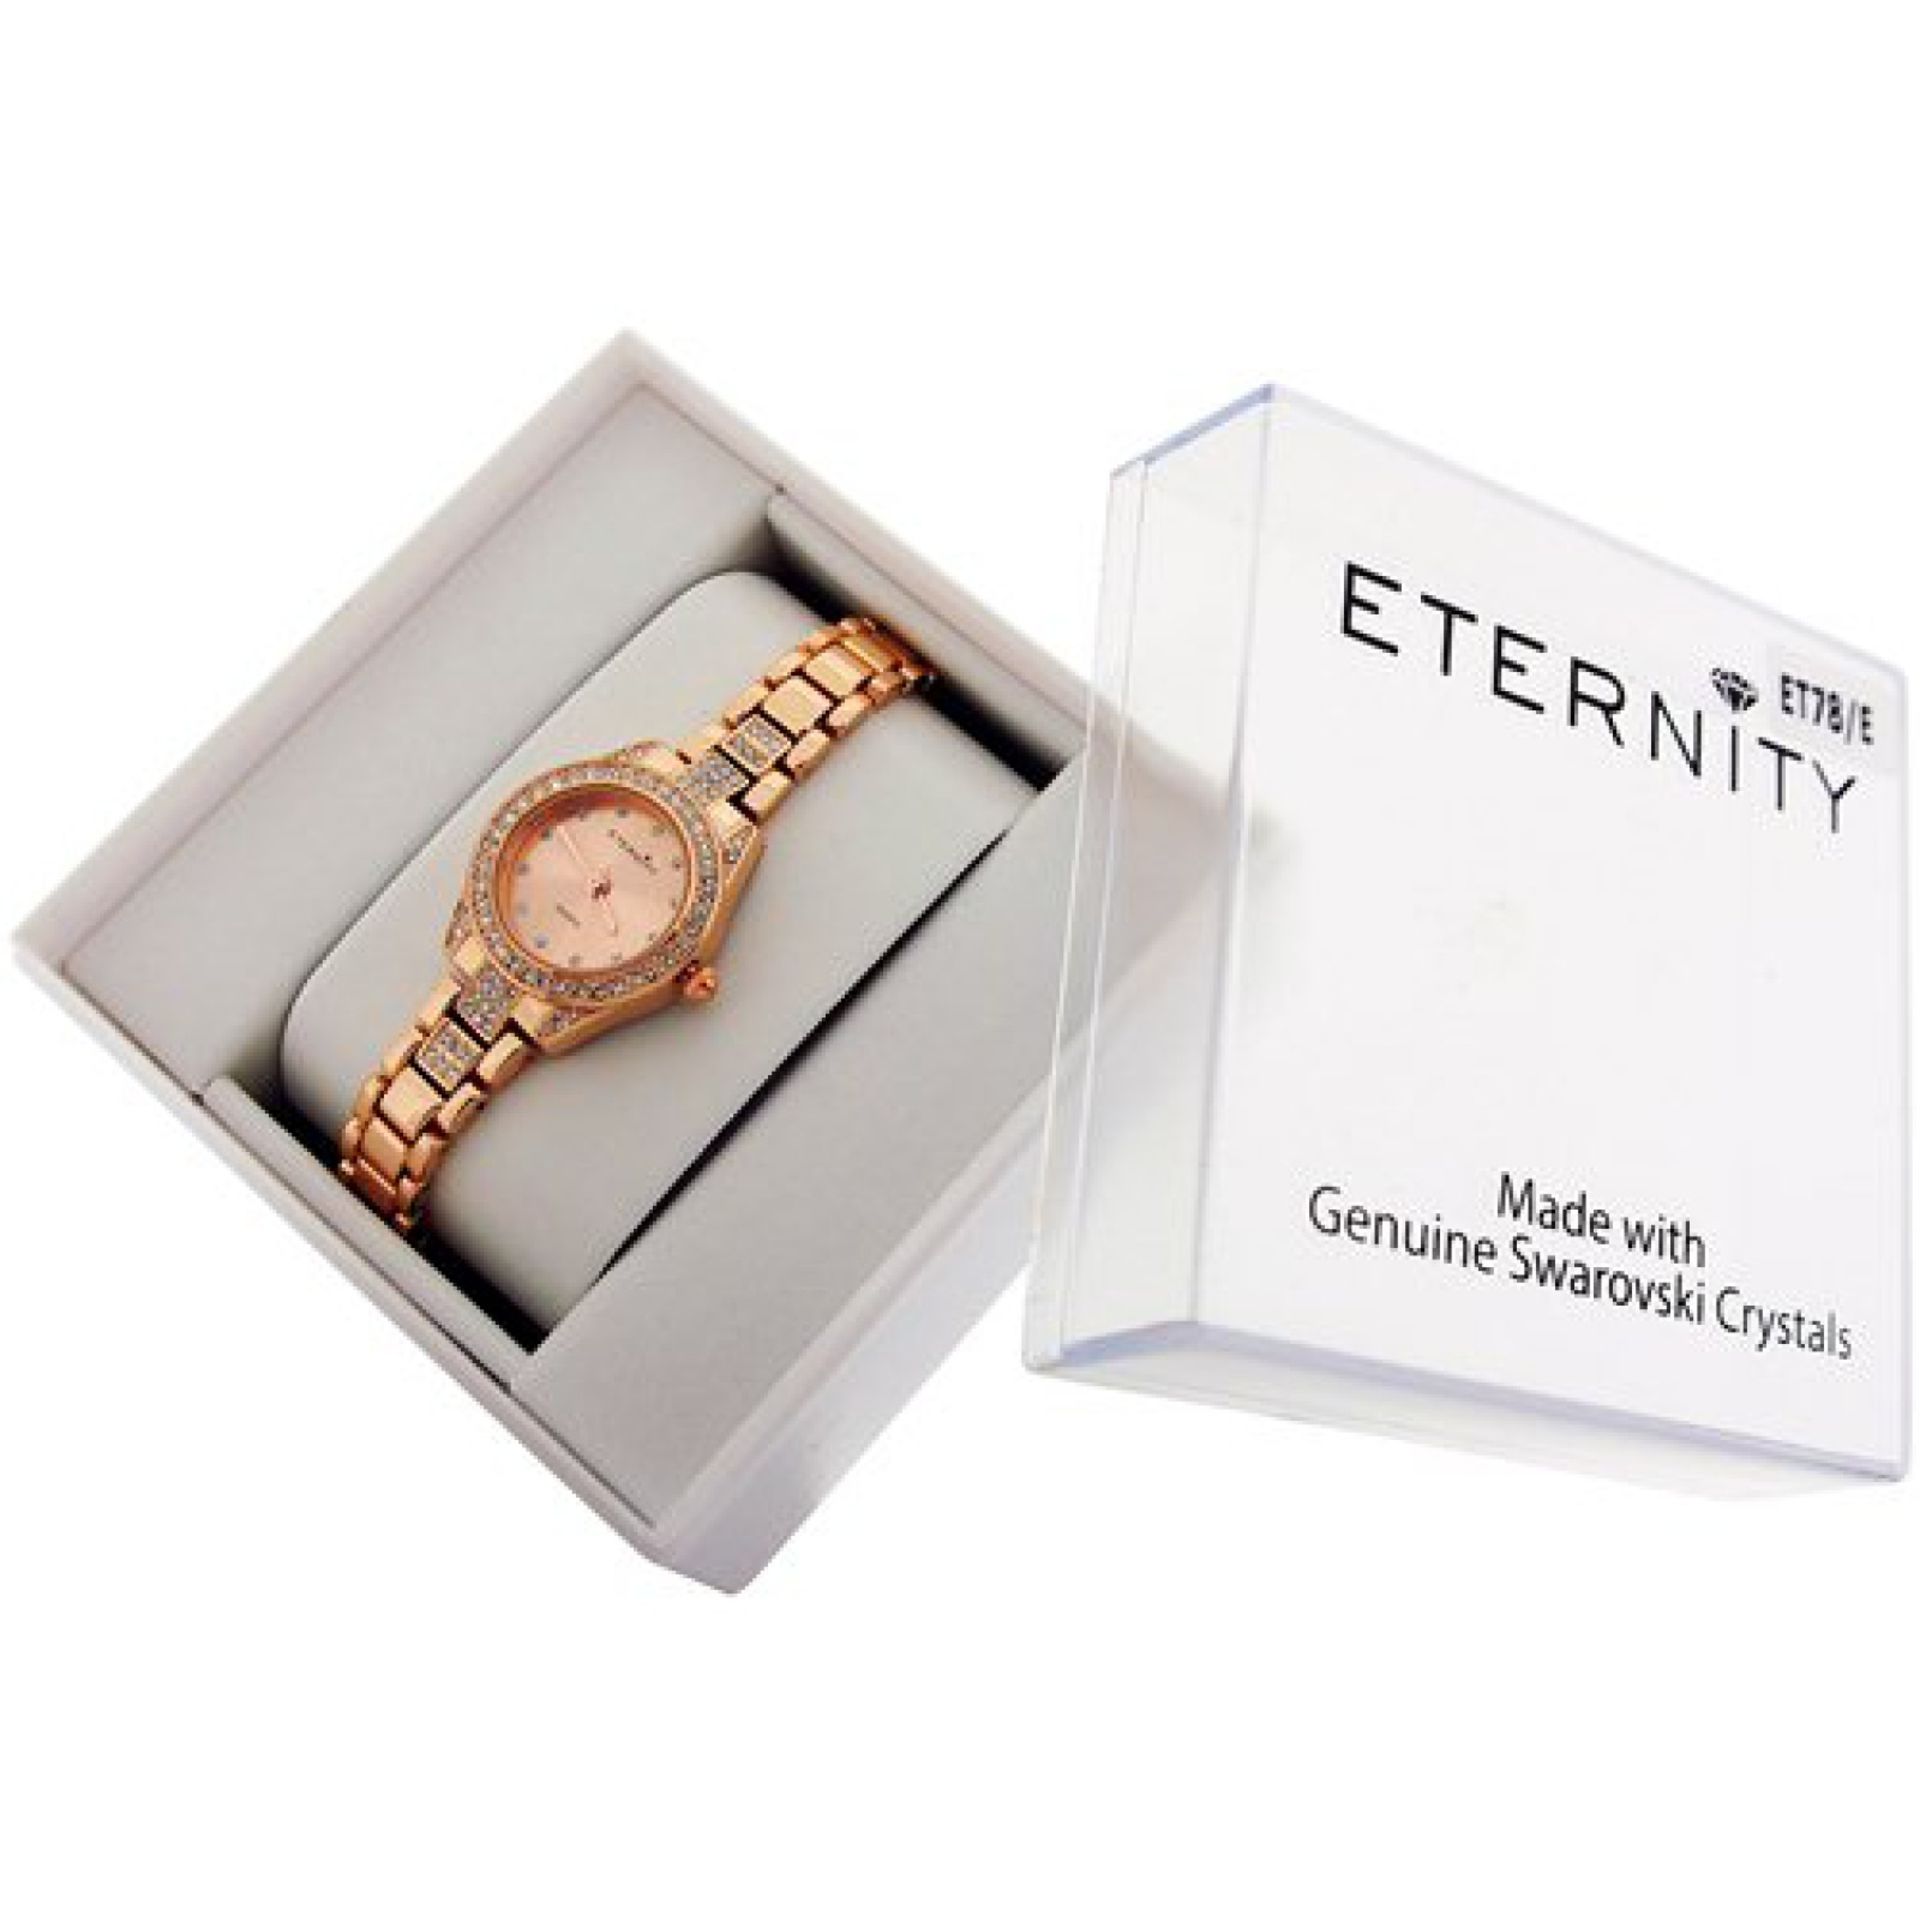 V Brand New Ladies YM Eternity Watch Made With Swarovski Crystals X 2 YOUR BID PRICE TO BE - Image 2 of 2